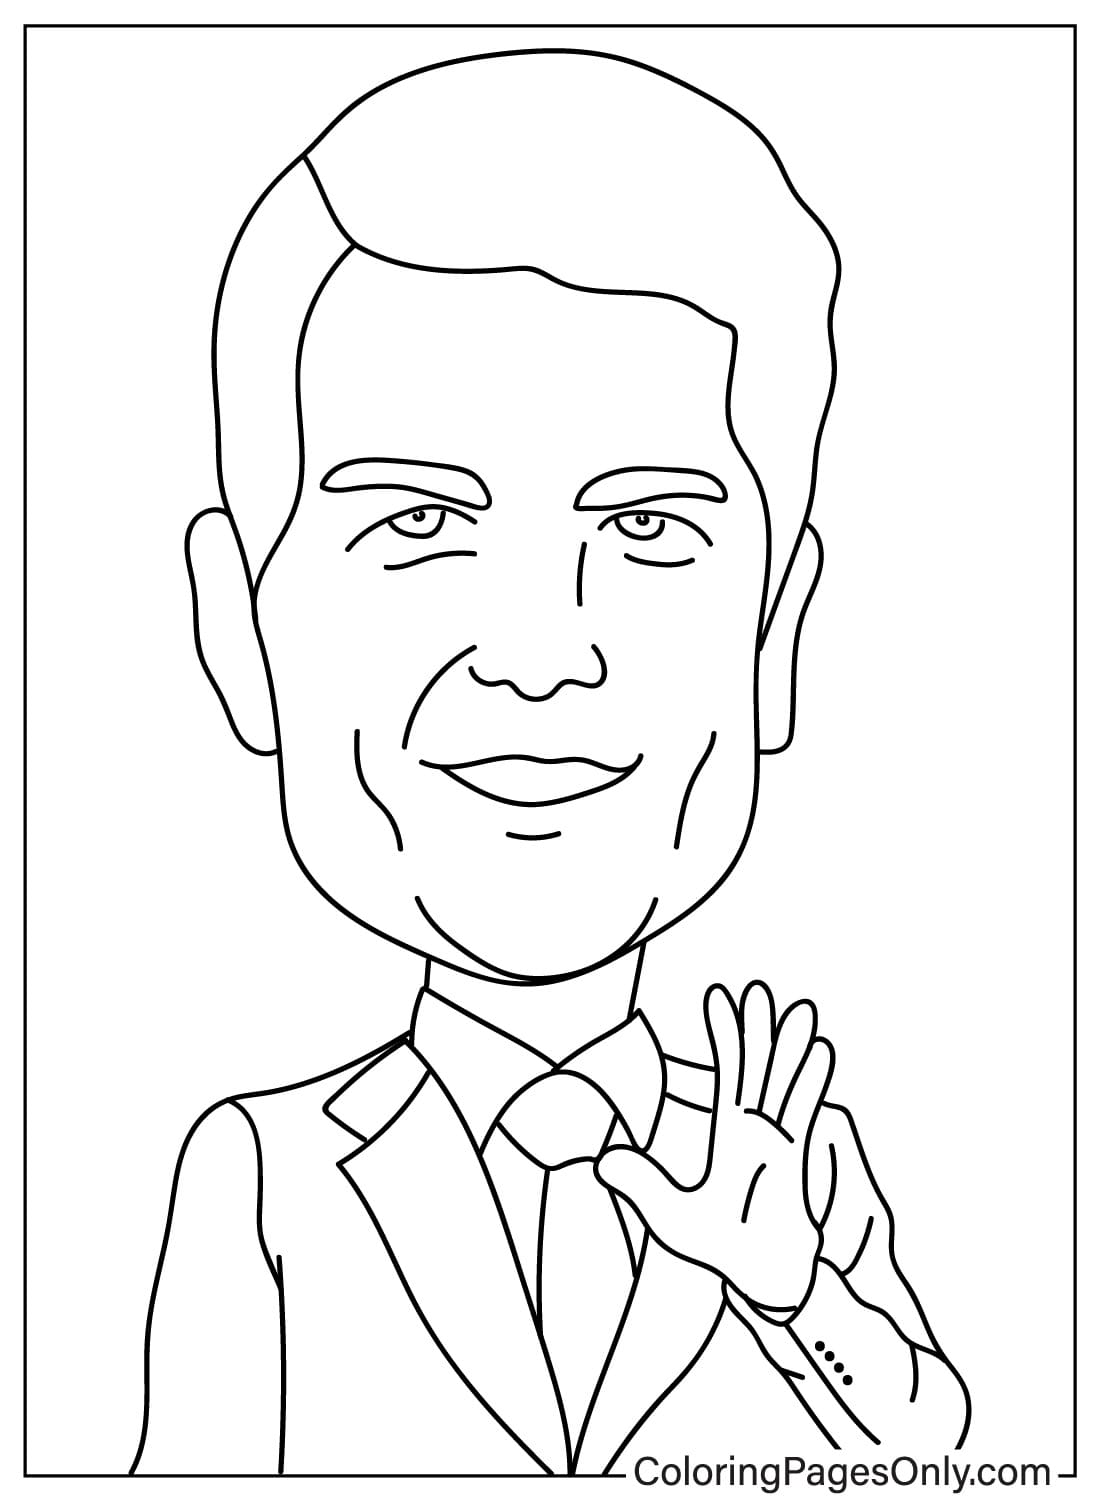 Printable Tom Cruise Coloring Page from Tom Cruise